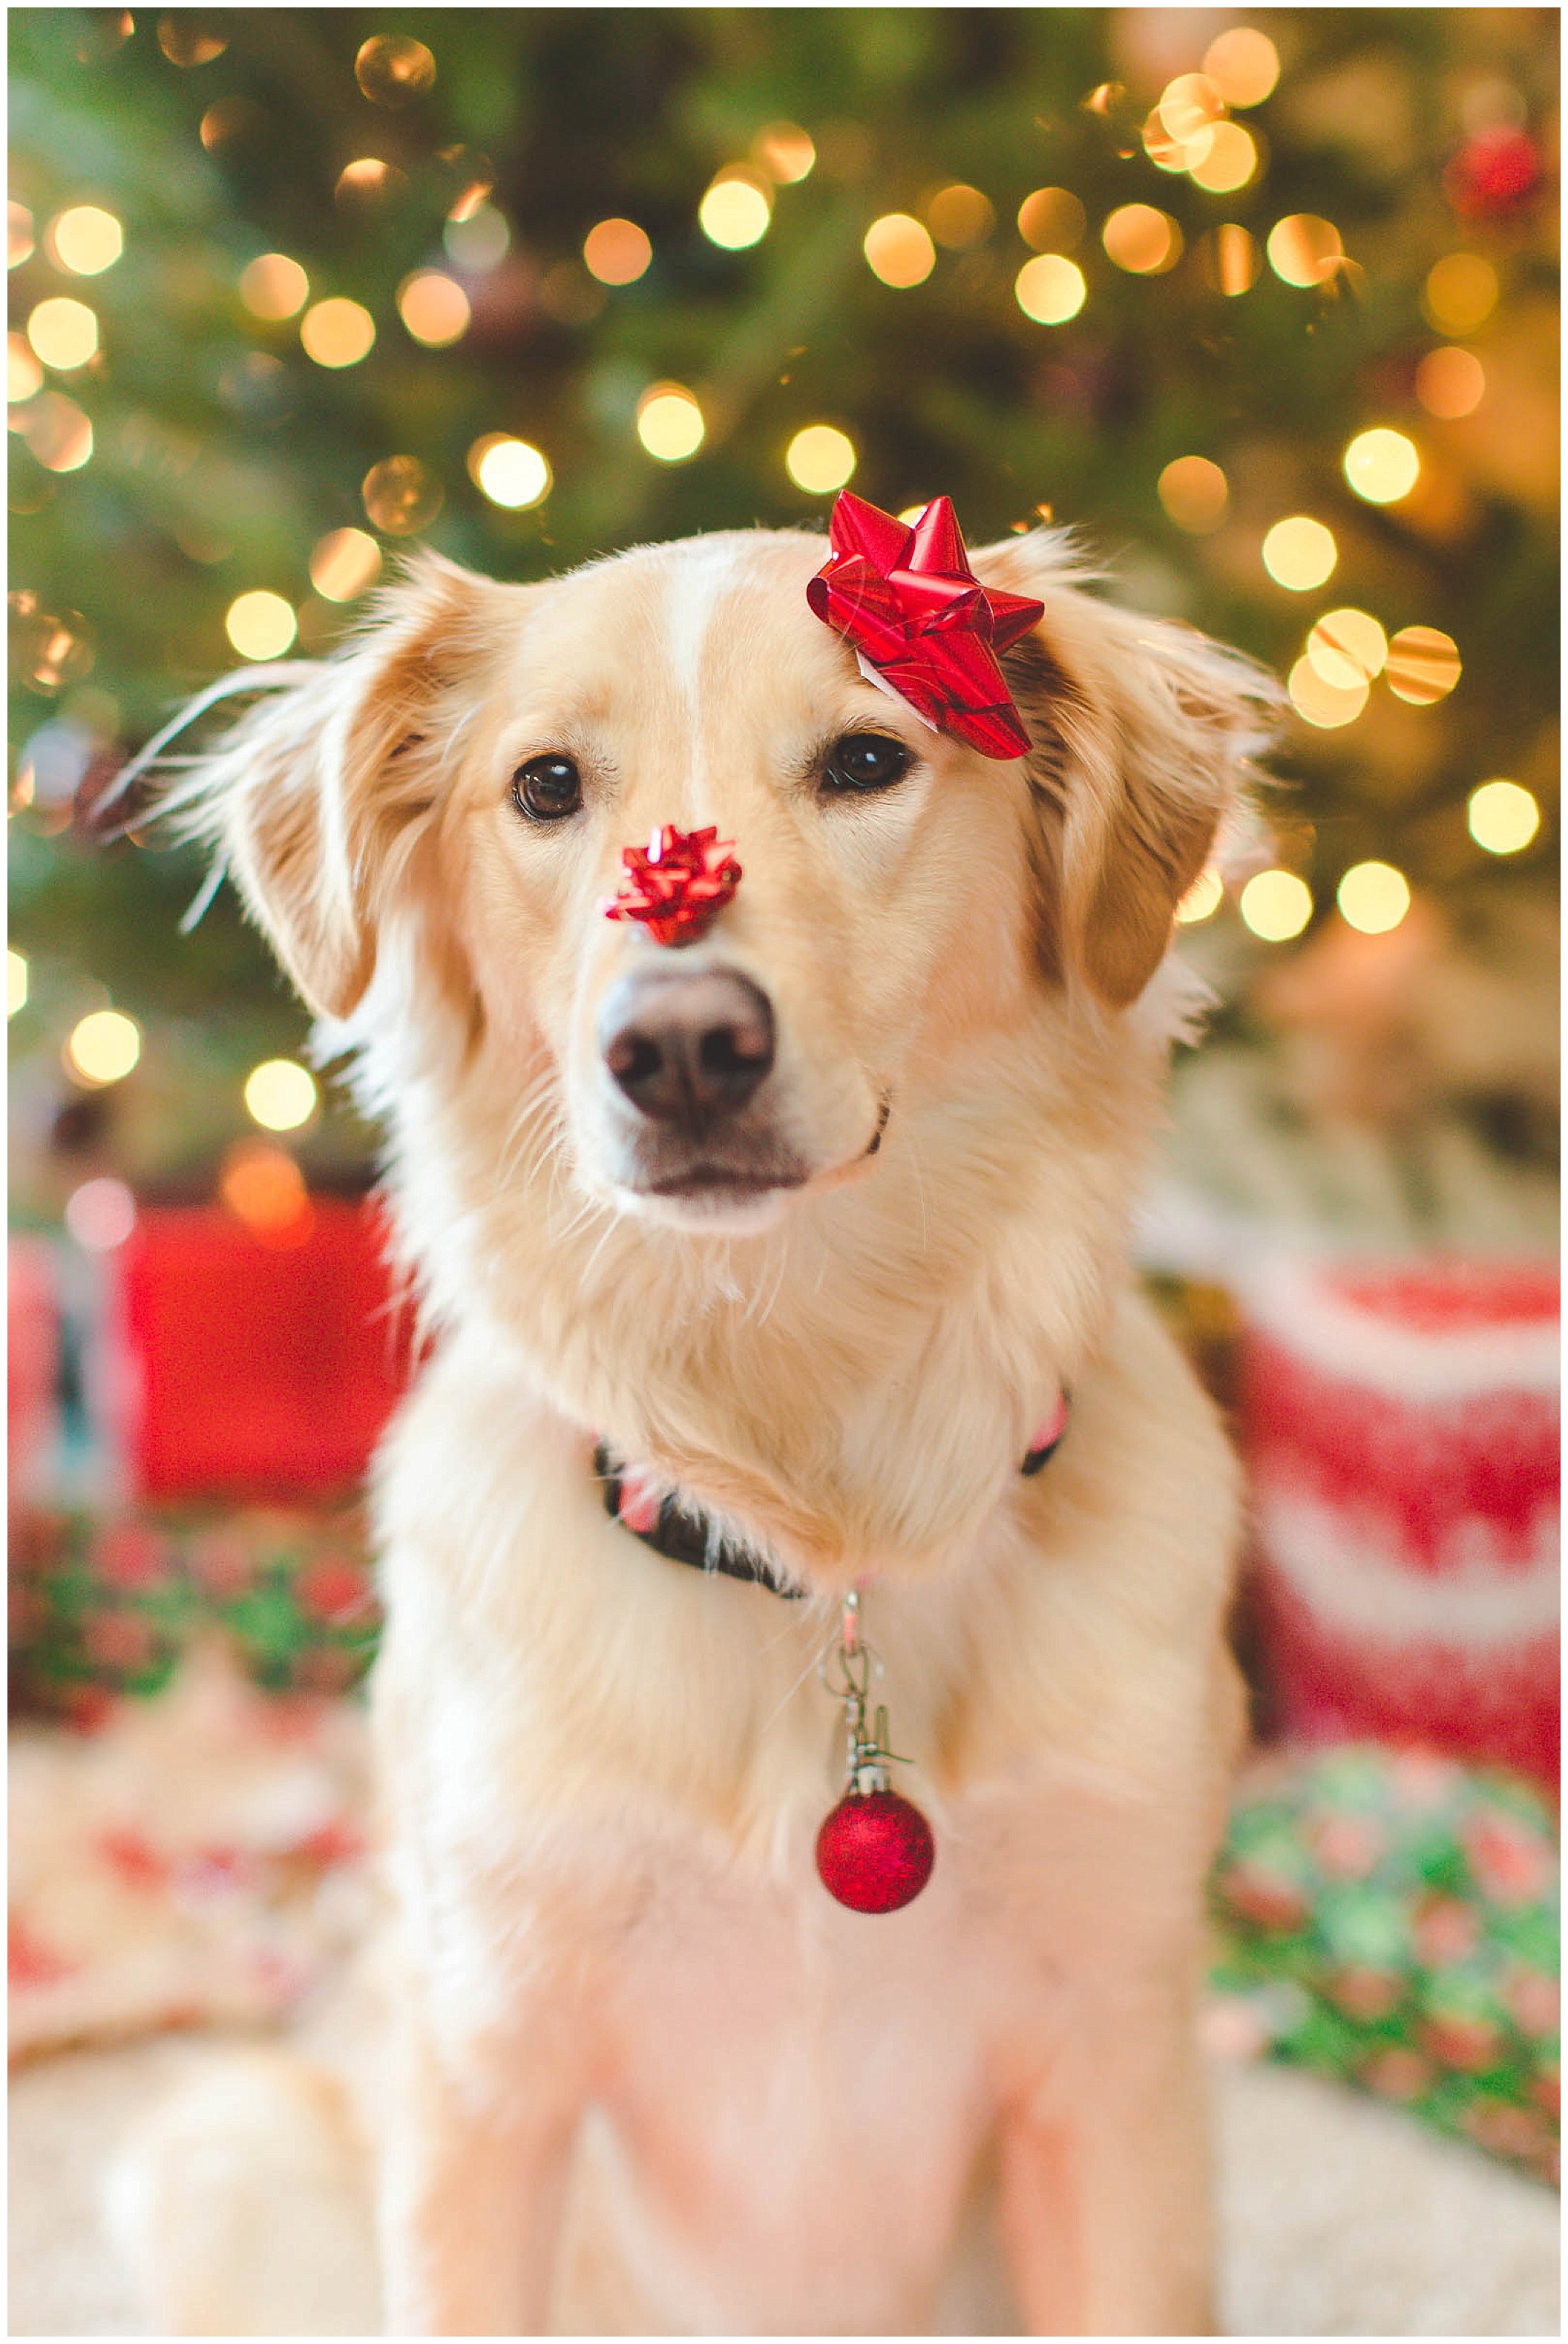 Don’t get too Wrapped up in Things This Christmas | Adorable Dog